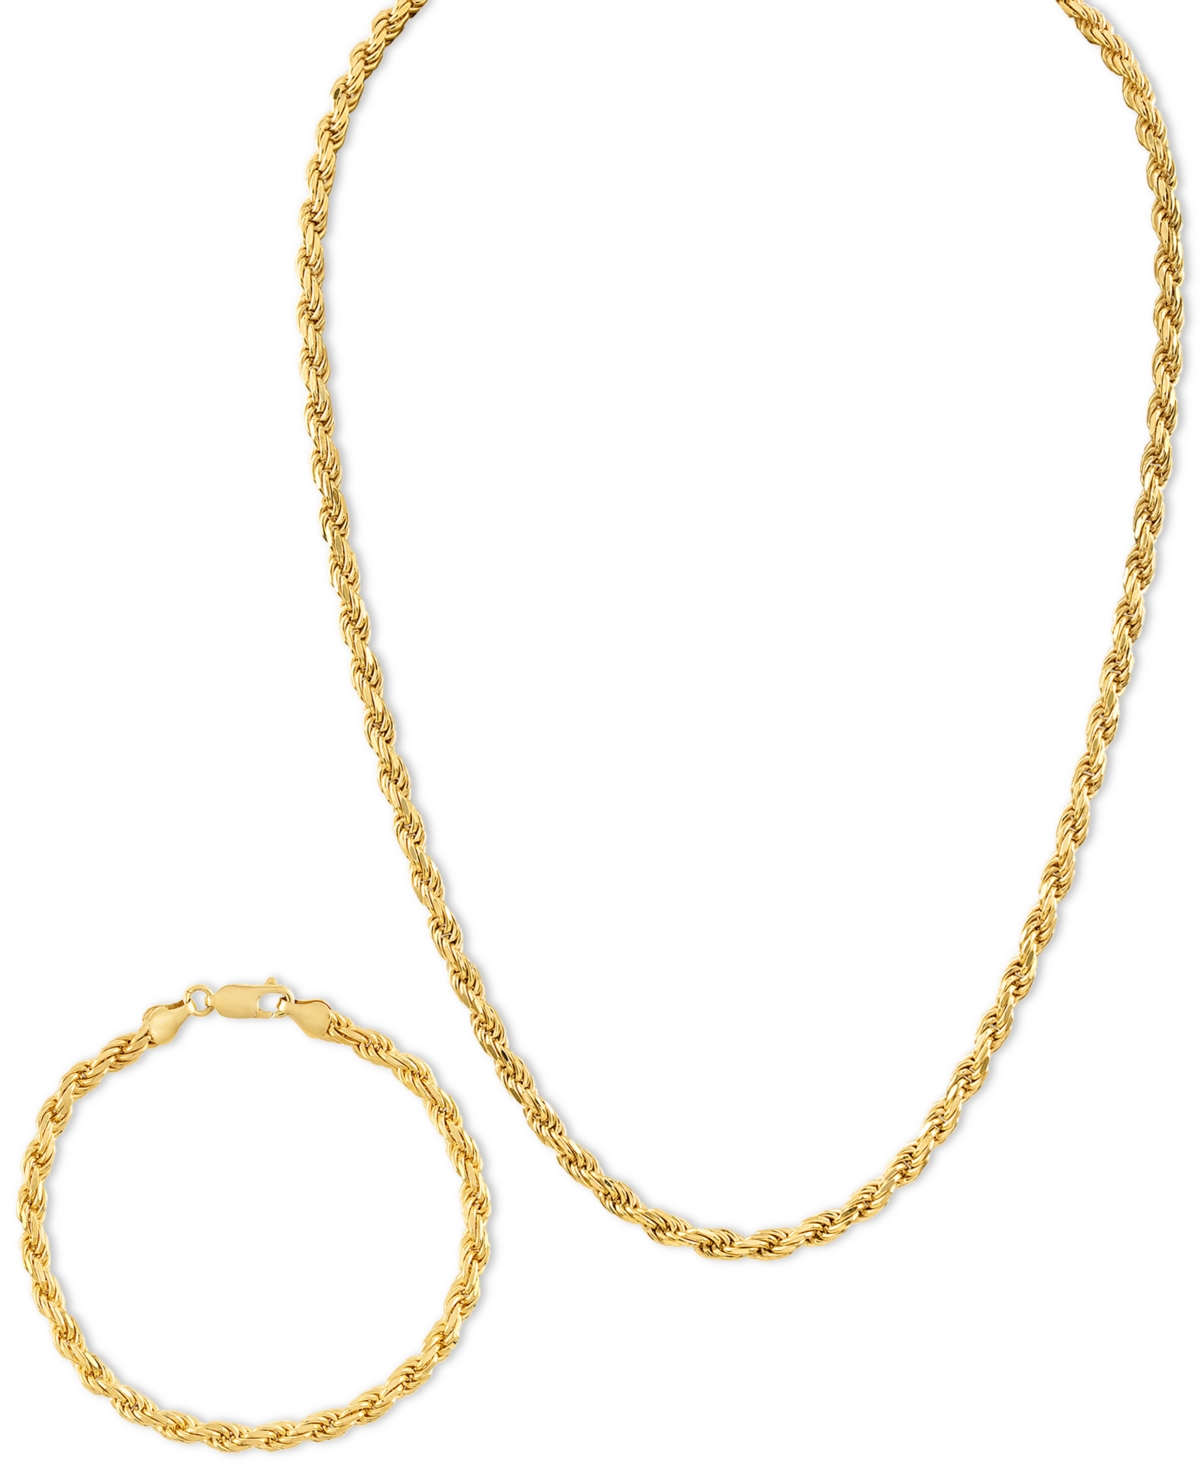 Esquire Men's Jewelry 2-Pc. Set 22" Rope Link Chain Necklace & Matching Bracelet, Created for Macy's